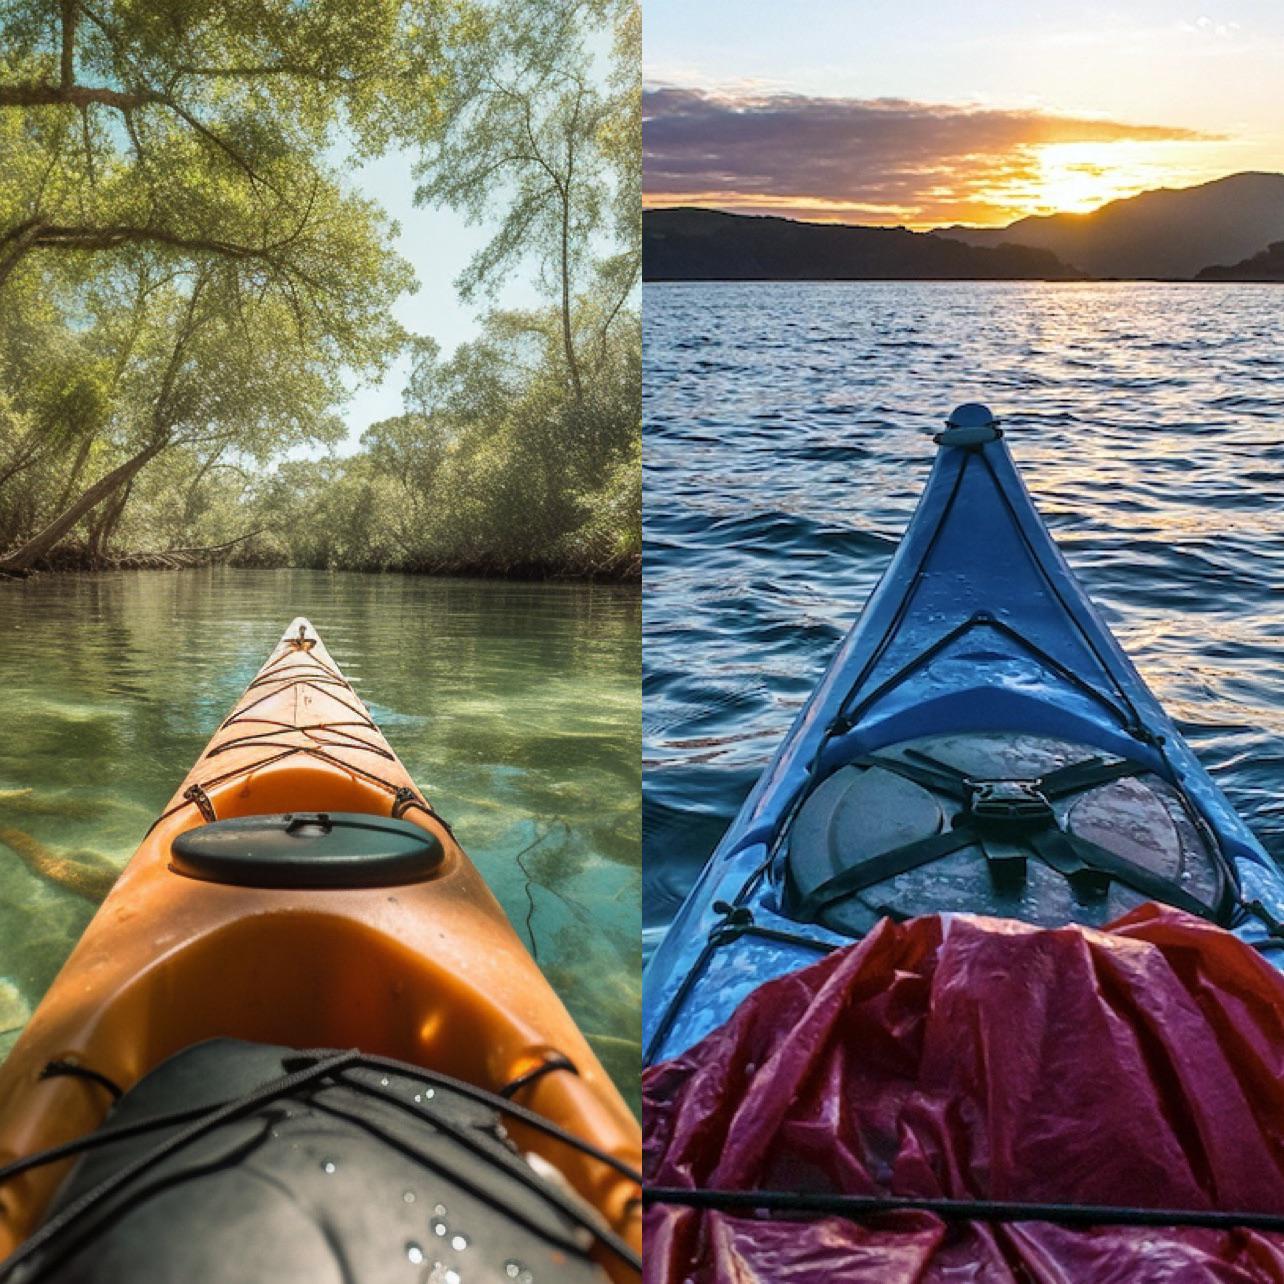 Images of kayaks are being discussed online. Can you distinguish a neural network image from a real photo?